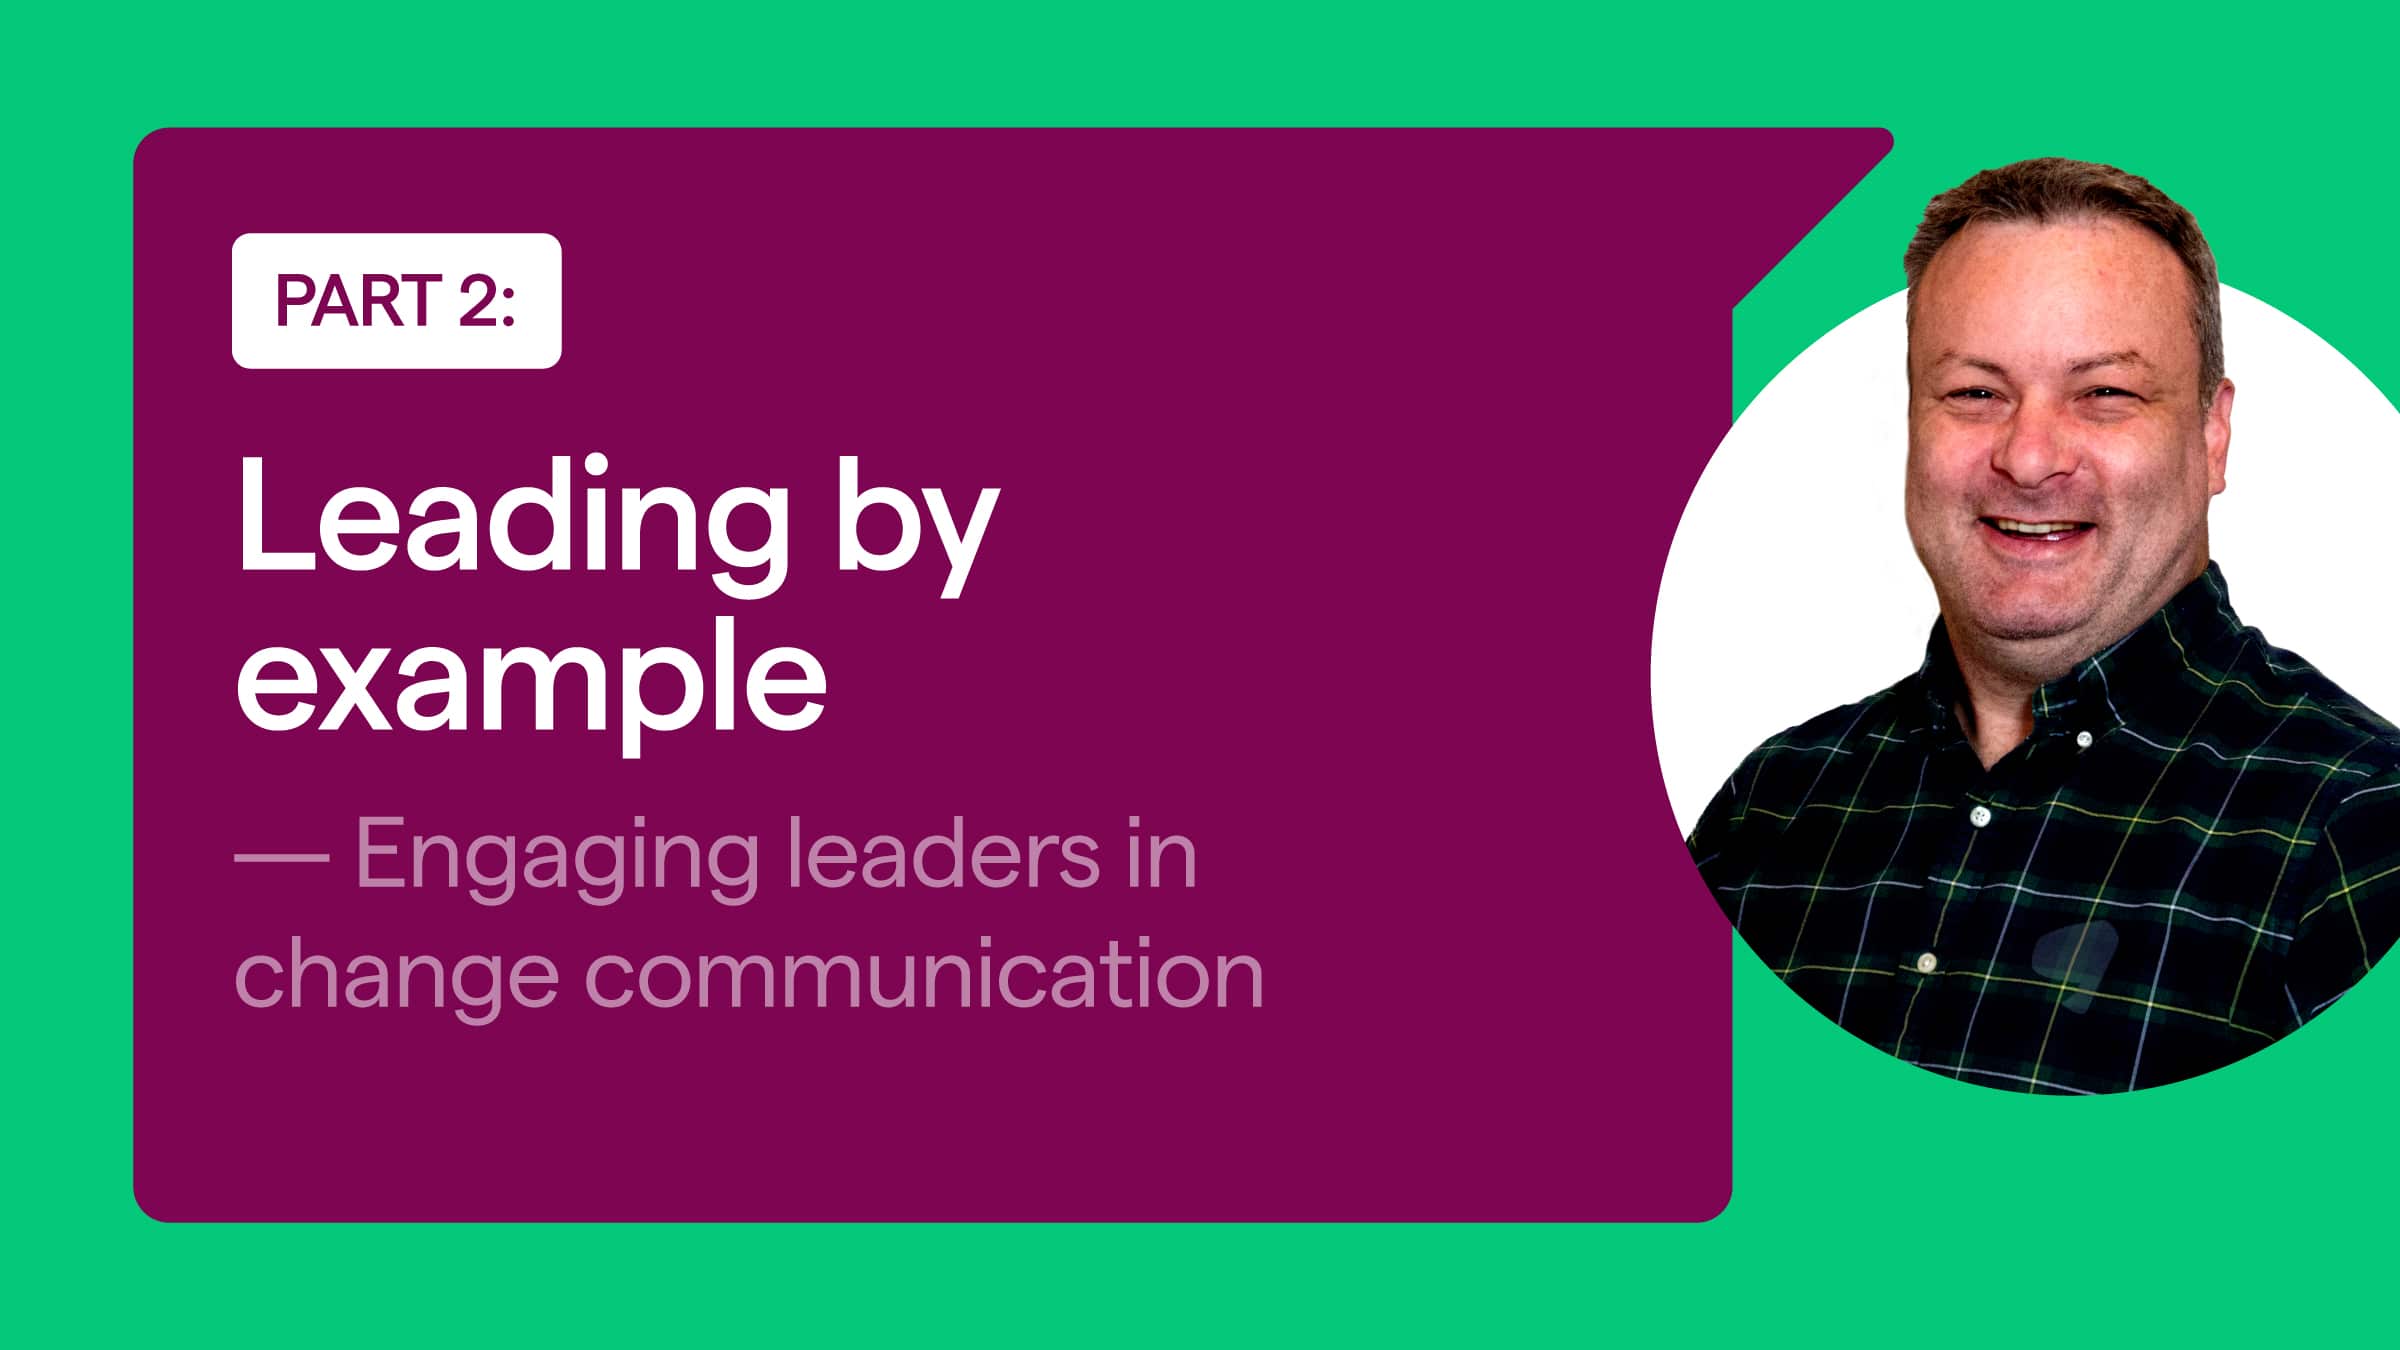 How to engage leaders in change communication